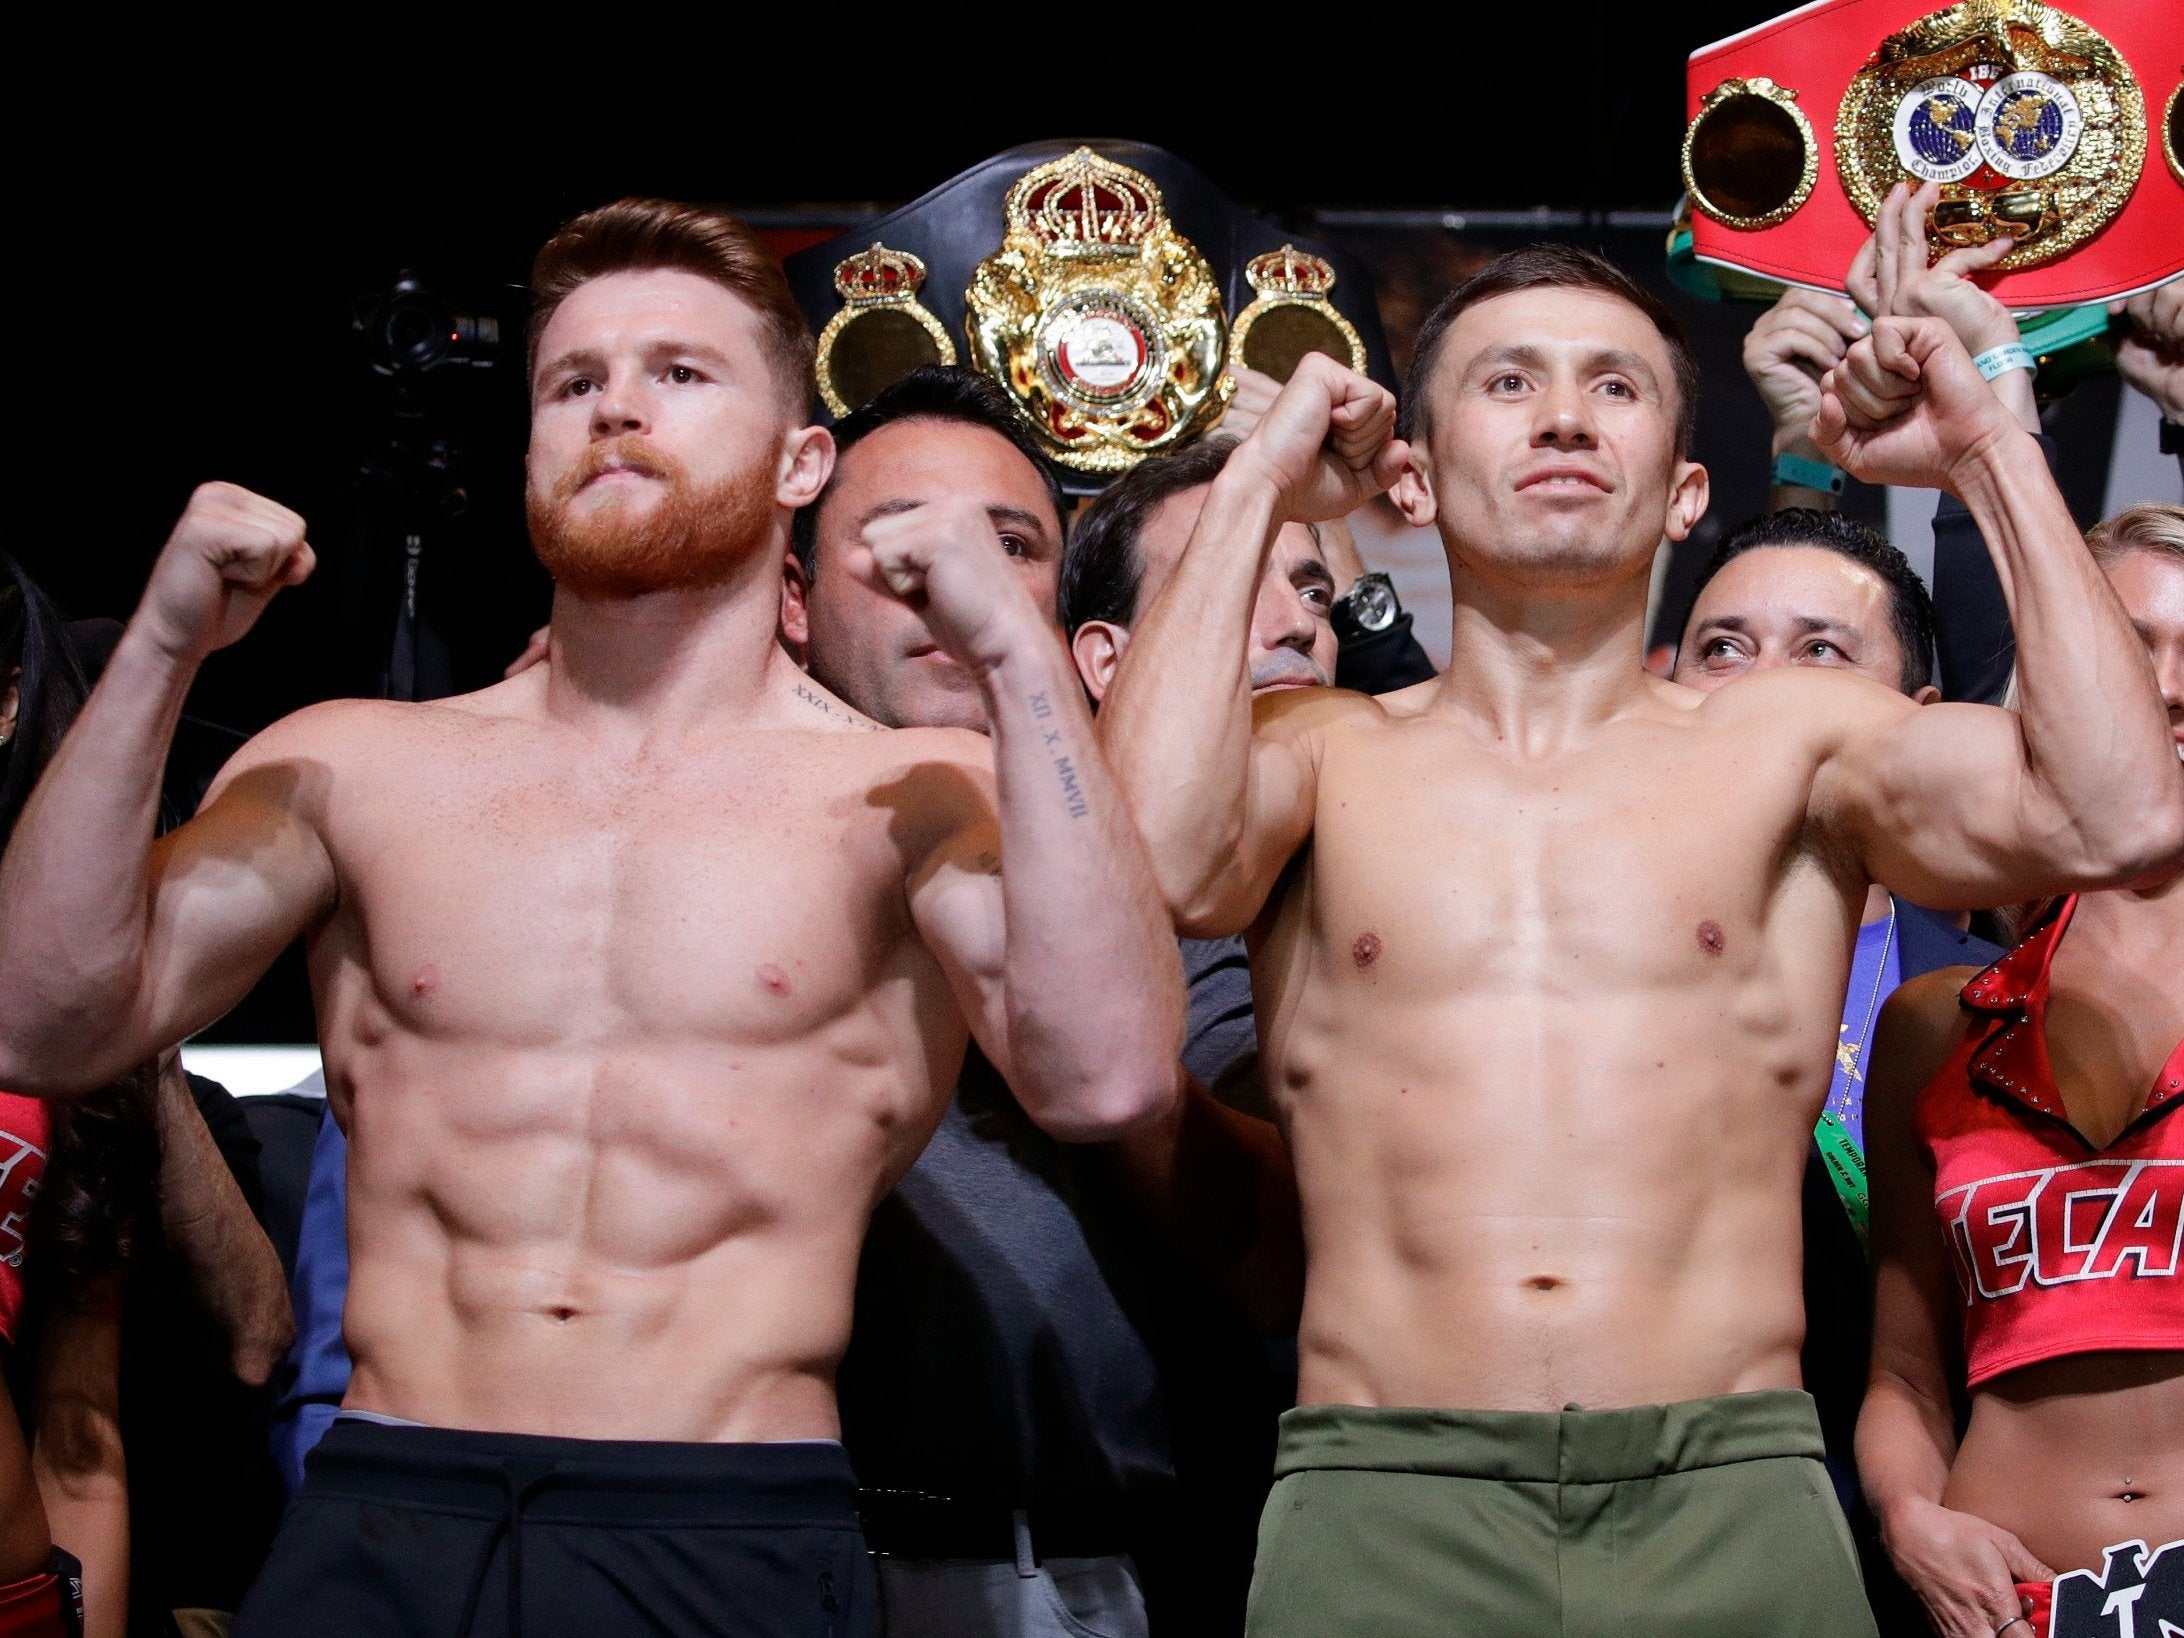 Saul ‘Canelo’ Alvarez (left) and rival Gennady Golovkin have fought one another twice